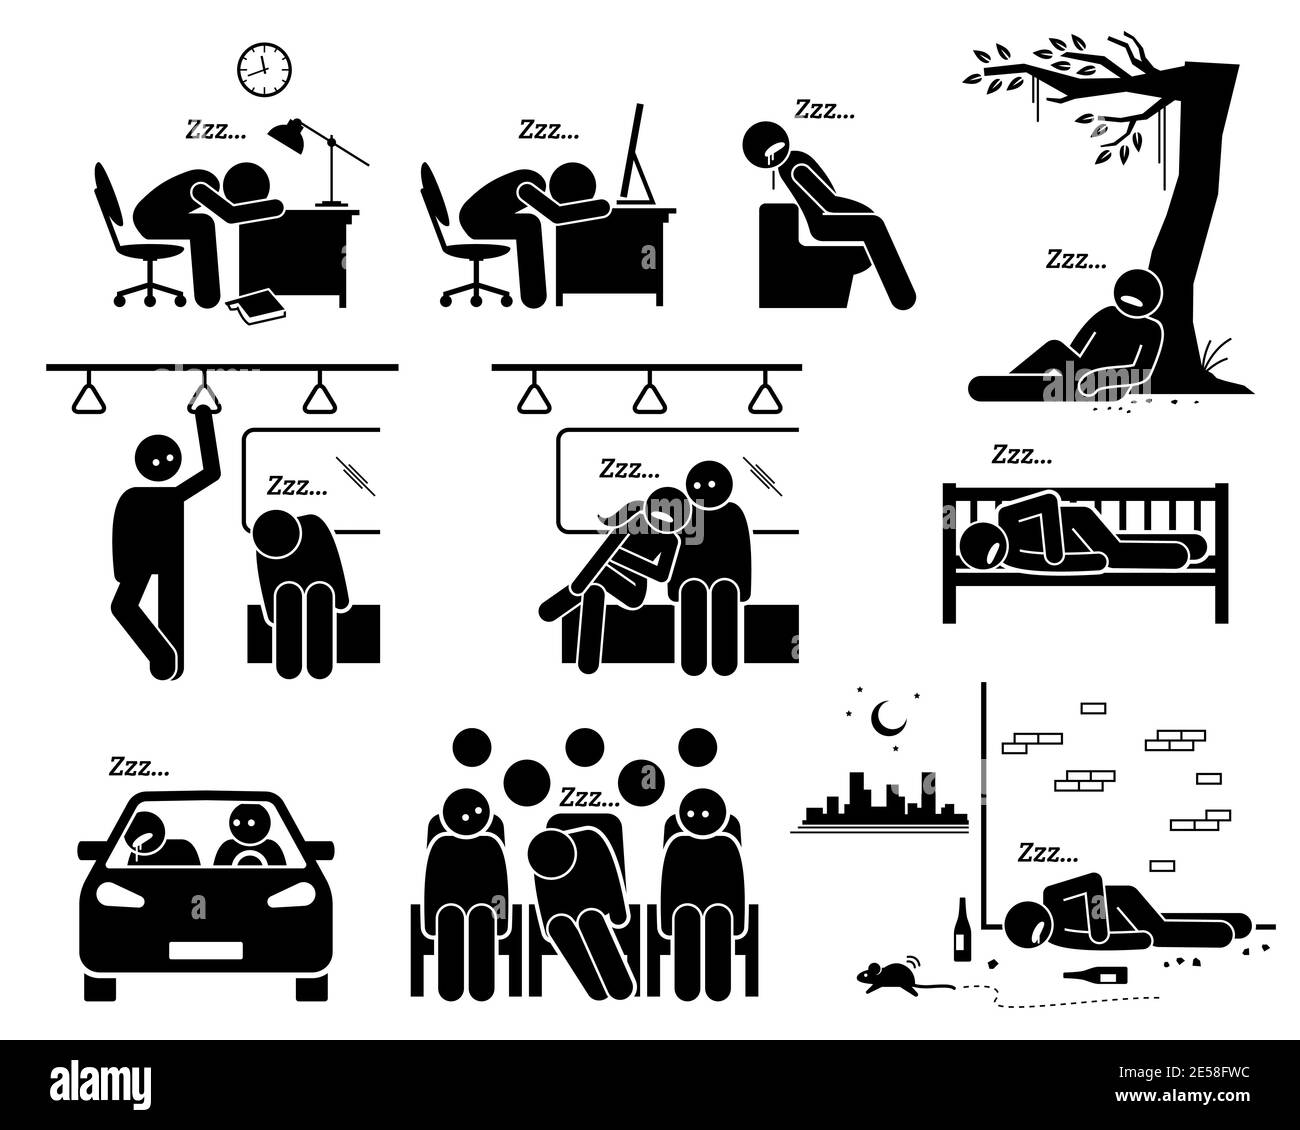 People sleeping at different places stick figure pictogram icons. Vector illustrations of a person falling asleep and taking a nap. Stock Vector